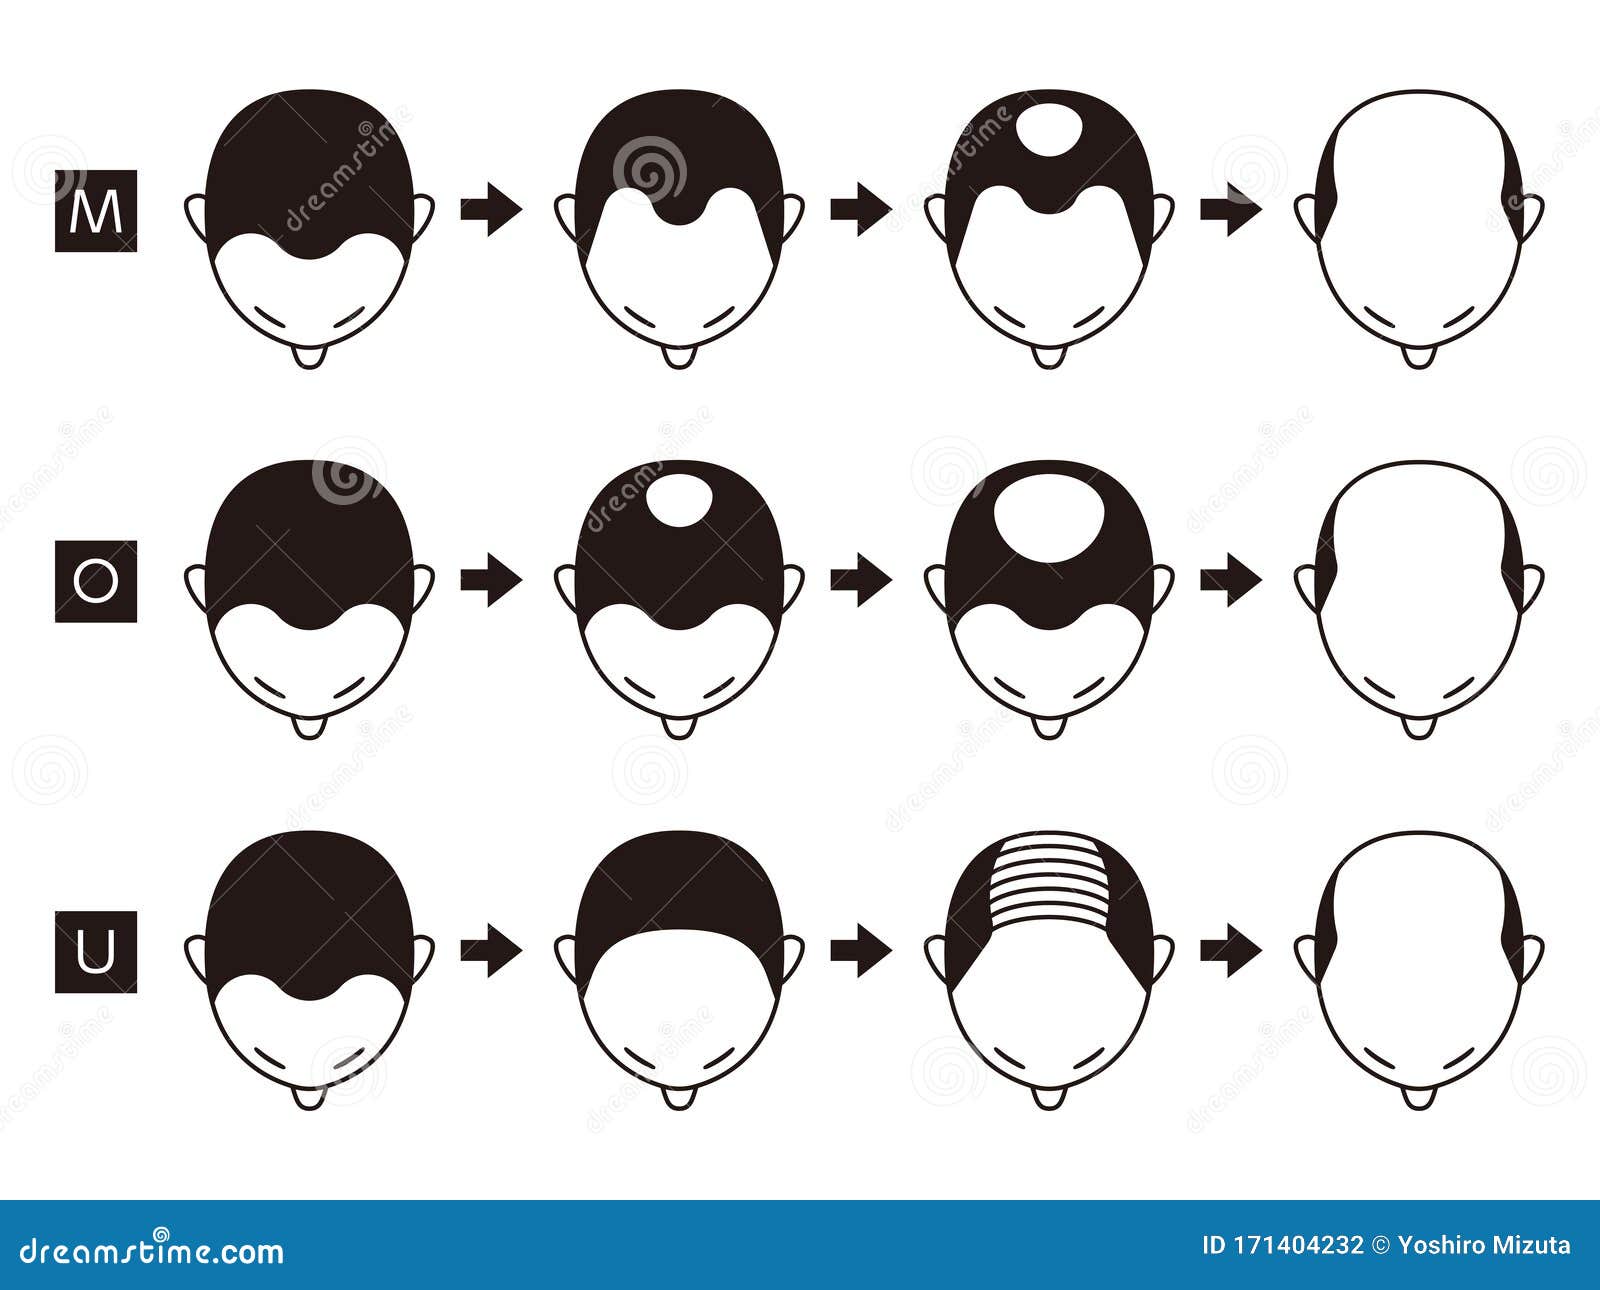 Information Chart of Hair Loss Stages and Types of Baldness Illustrated on  a Male Head Stock Vector - Illustration of person, human: 171404232